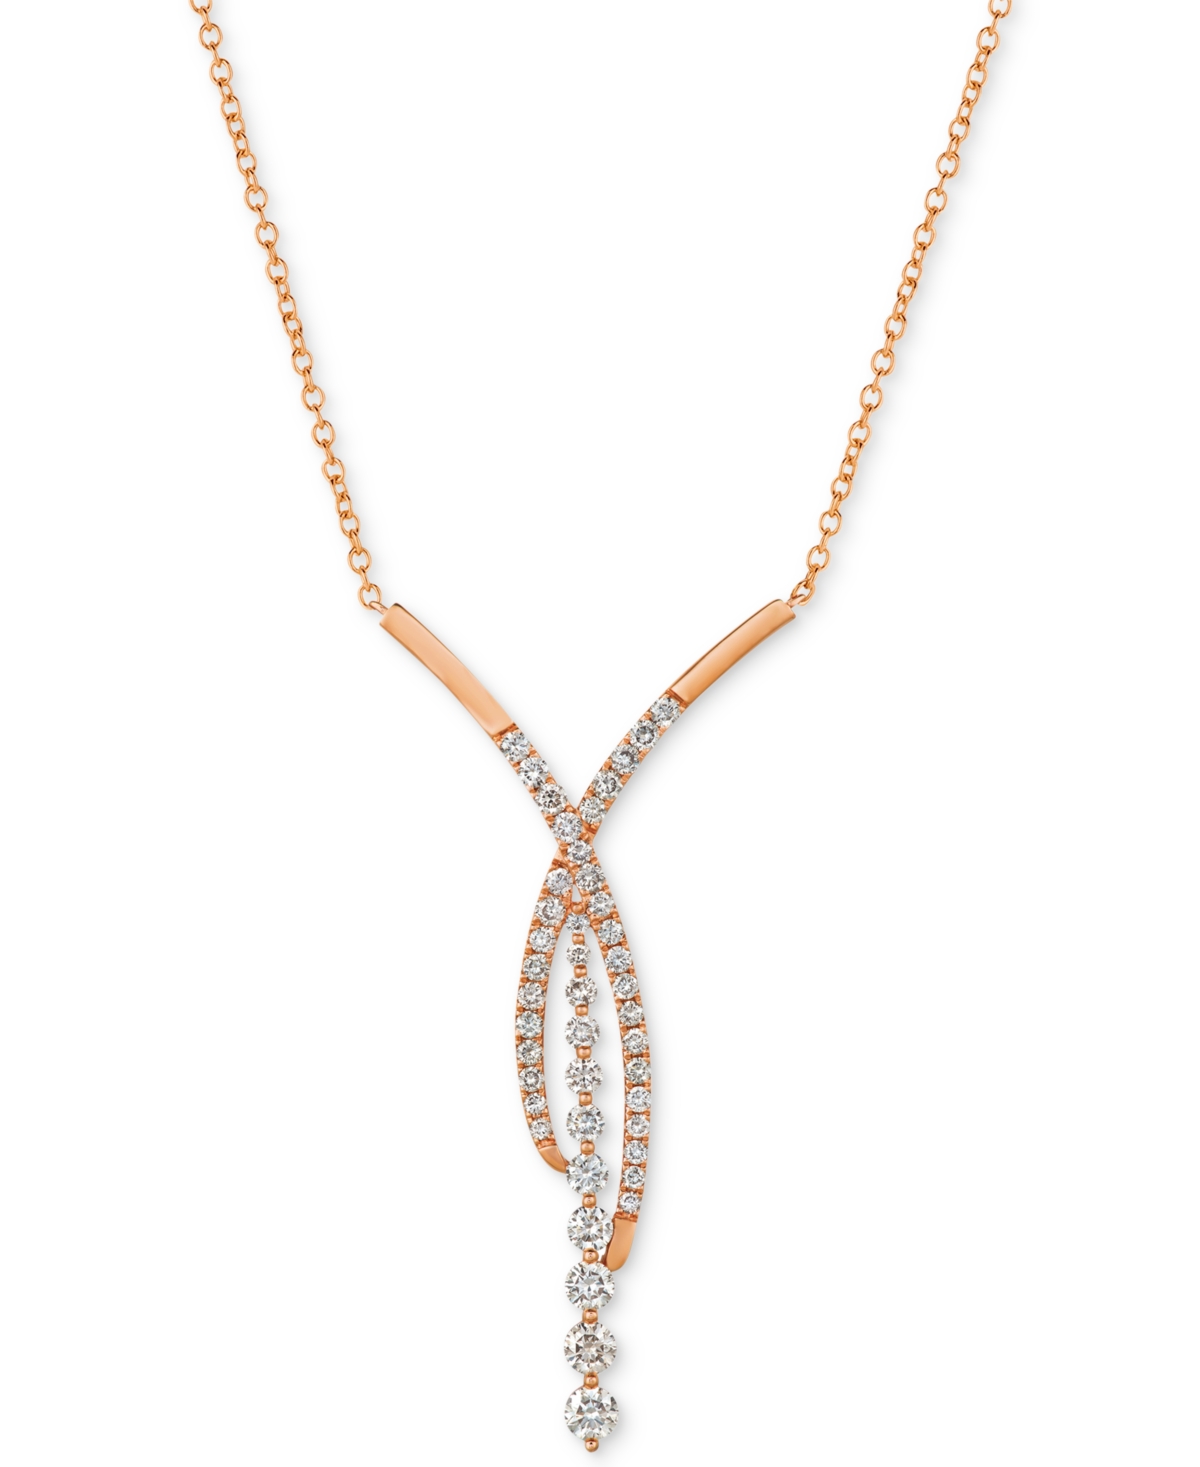 Diamond Fancy 18" Statement Necklace (1-5/8 ct. t.w.) in 14k Rose Gold (Also Available in Yellow Gold) - Rose Gold